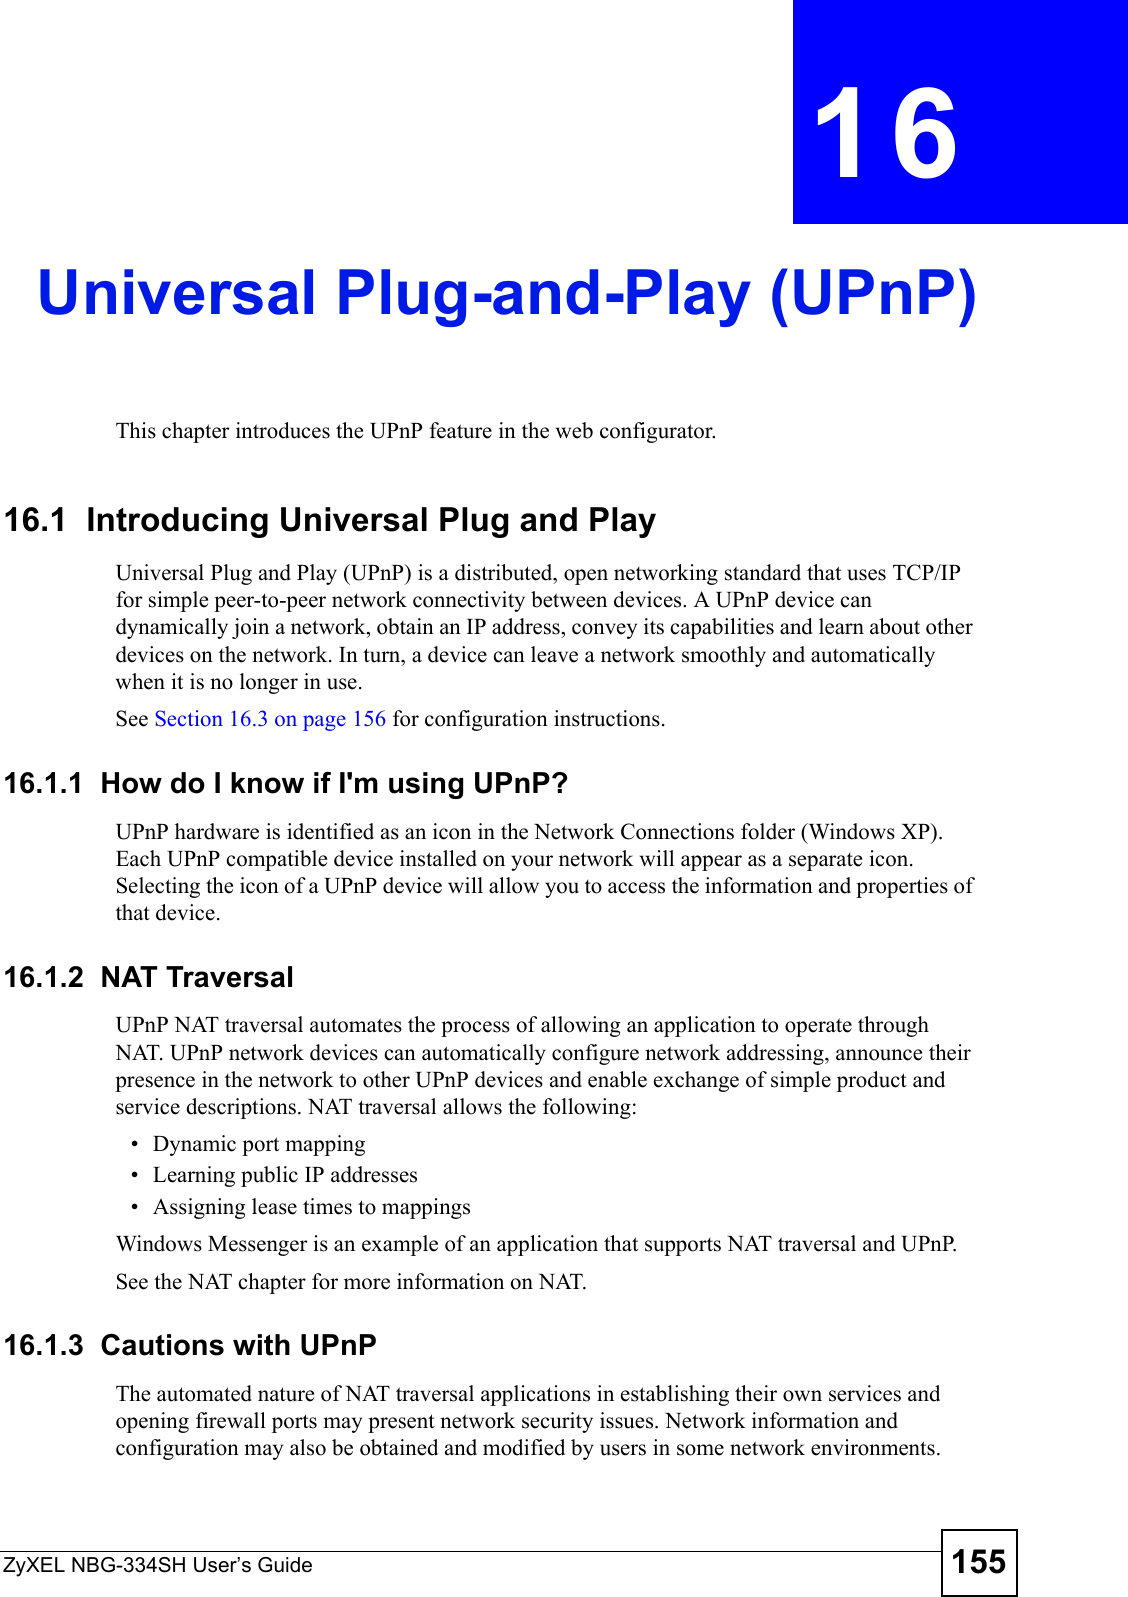 ZyXEL NBG-334SH User’s Guide 155CHAPTER  16 Universal Plug-and-Play (UPnP)This chapter introduces the UPnP feature in the web configurator.16.1  Introducing Universal Plug and Play Universal Plug and Play (UPnP) is a distributed, open networking standard that uses TCP/IP for simple peer-to-peer network connectivity between devices. A UPnP device can dynamically join a network, obtain an IP address, convey its capabilities and learn about other devices on the network. In turn, a device can leave a network smoothly and automatically when it is no longer in use.See Section 16.3 on page 156 for configuration instructions. 16.1.1  How do I know if I&apos;m using UPnP? UPnP hardware is identified as an icon in the Network Connections folder (Windows XP). Each UPnP compatible device installed on your network will appear as a separate icon. Selecting the icon of a UPnP device will allow you to access the information and properties of that device. 16.1.2  NAT TraversalUPnP NAT traversal automates the process of allowing an application to operate through NAT. UPnP network devices can automatically configure network addressing, announce their presence in the network to other UPnP devices and enable exchange of simple product and service descriptions. NAT traversal allows the following:• Dynamic port mapping• Learning public IP addresses• Assigning lease times to mappingsWindows Messenger is an example of an application that supports NAT traversal and UPnP. See the NAT chapter for more information on NAT.16.1.3  Cautions with UPnPThe automated nature of NAT traversal applications in establishing their own services and opening firewall ports may present network security issues. Network information and configuration may also be obtained and modified by users in some network environments. 